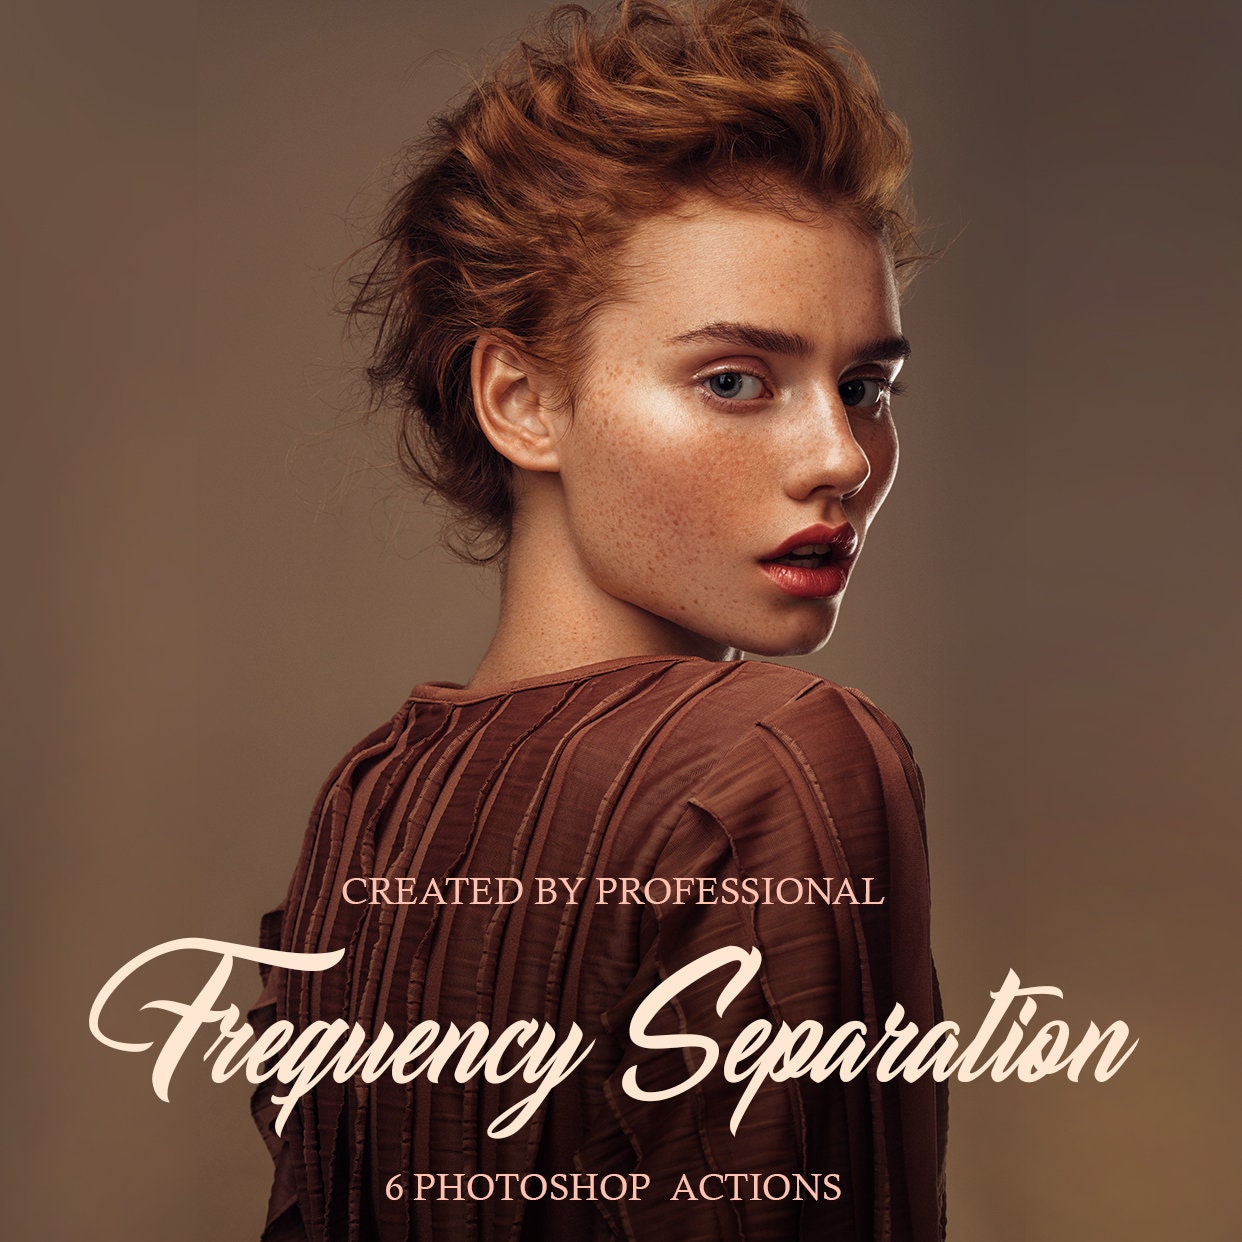 Frequency Separation Photoshop Actions 6 Photoshop Actions 